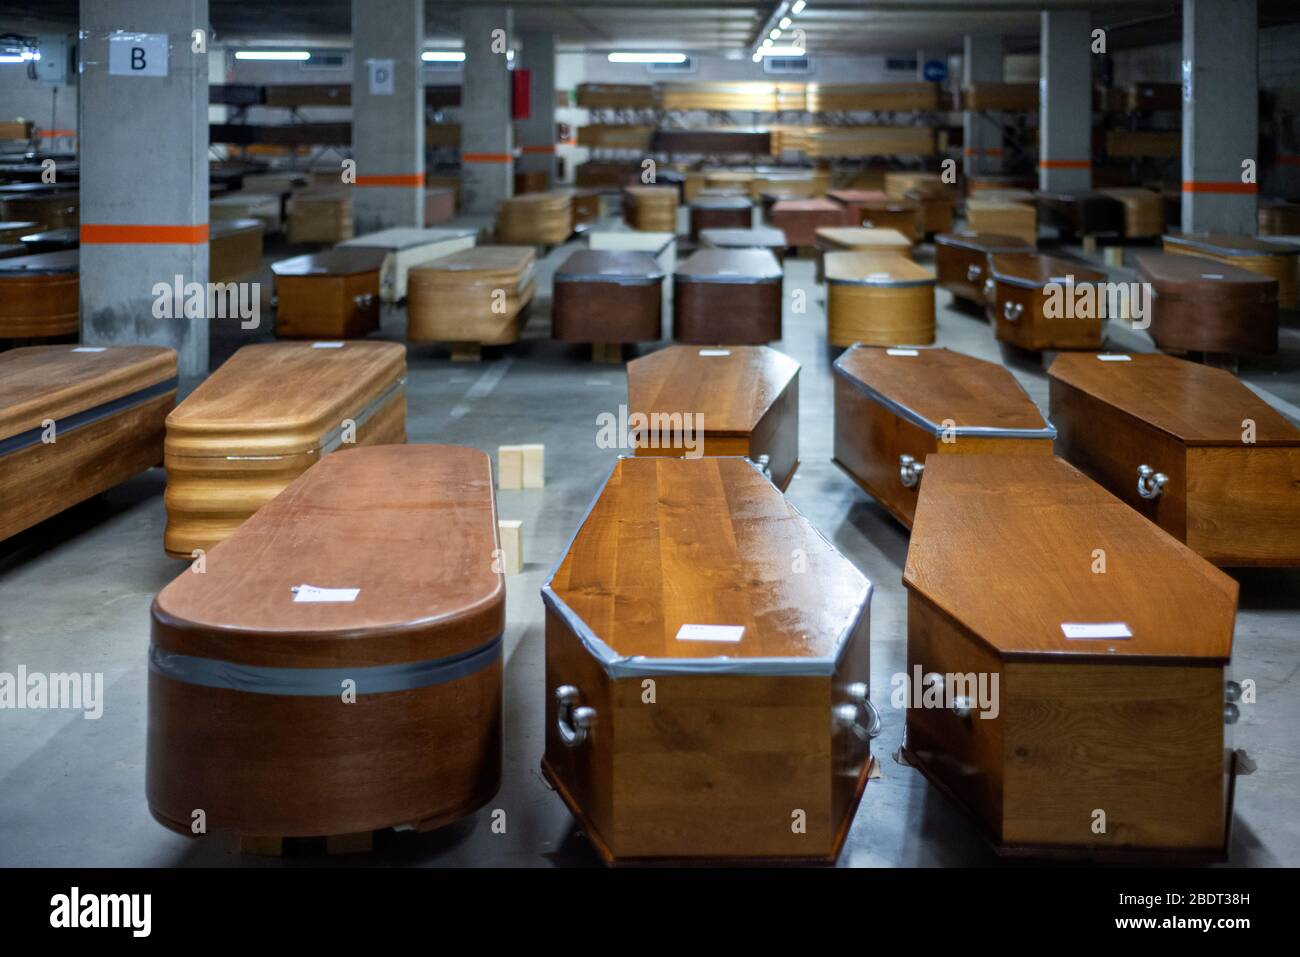 Parking area of Collserola Mortuary full of coffins, of which most have corpse and others waiting for those to die in the next days. Spain is one of t Stock Photo